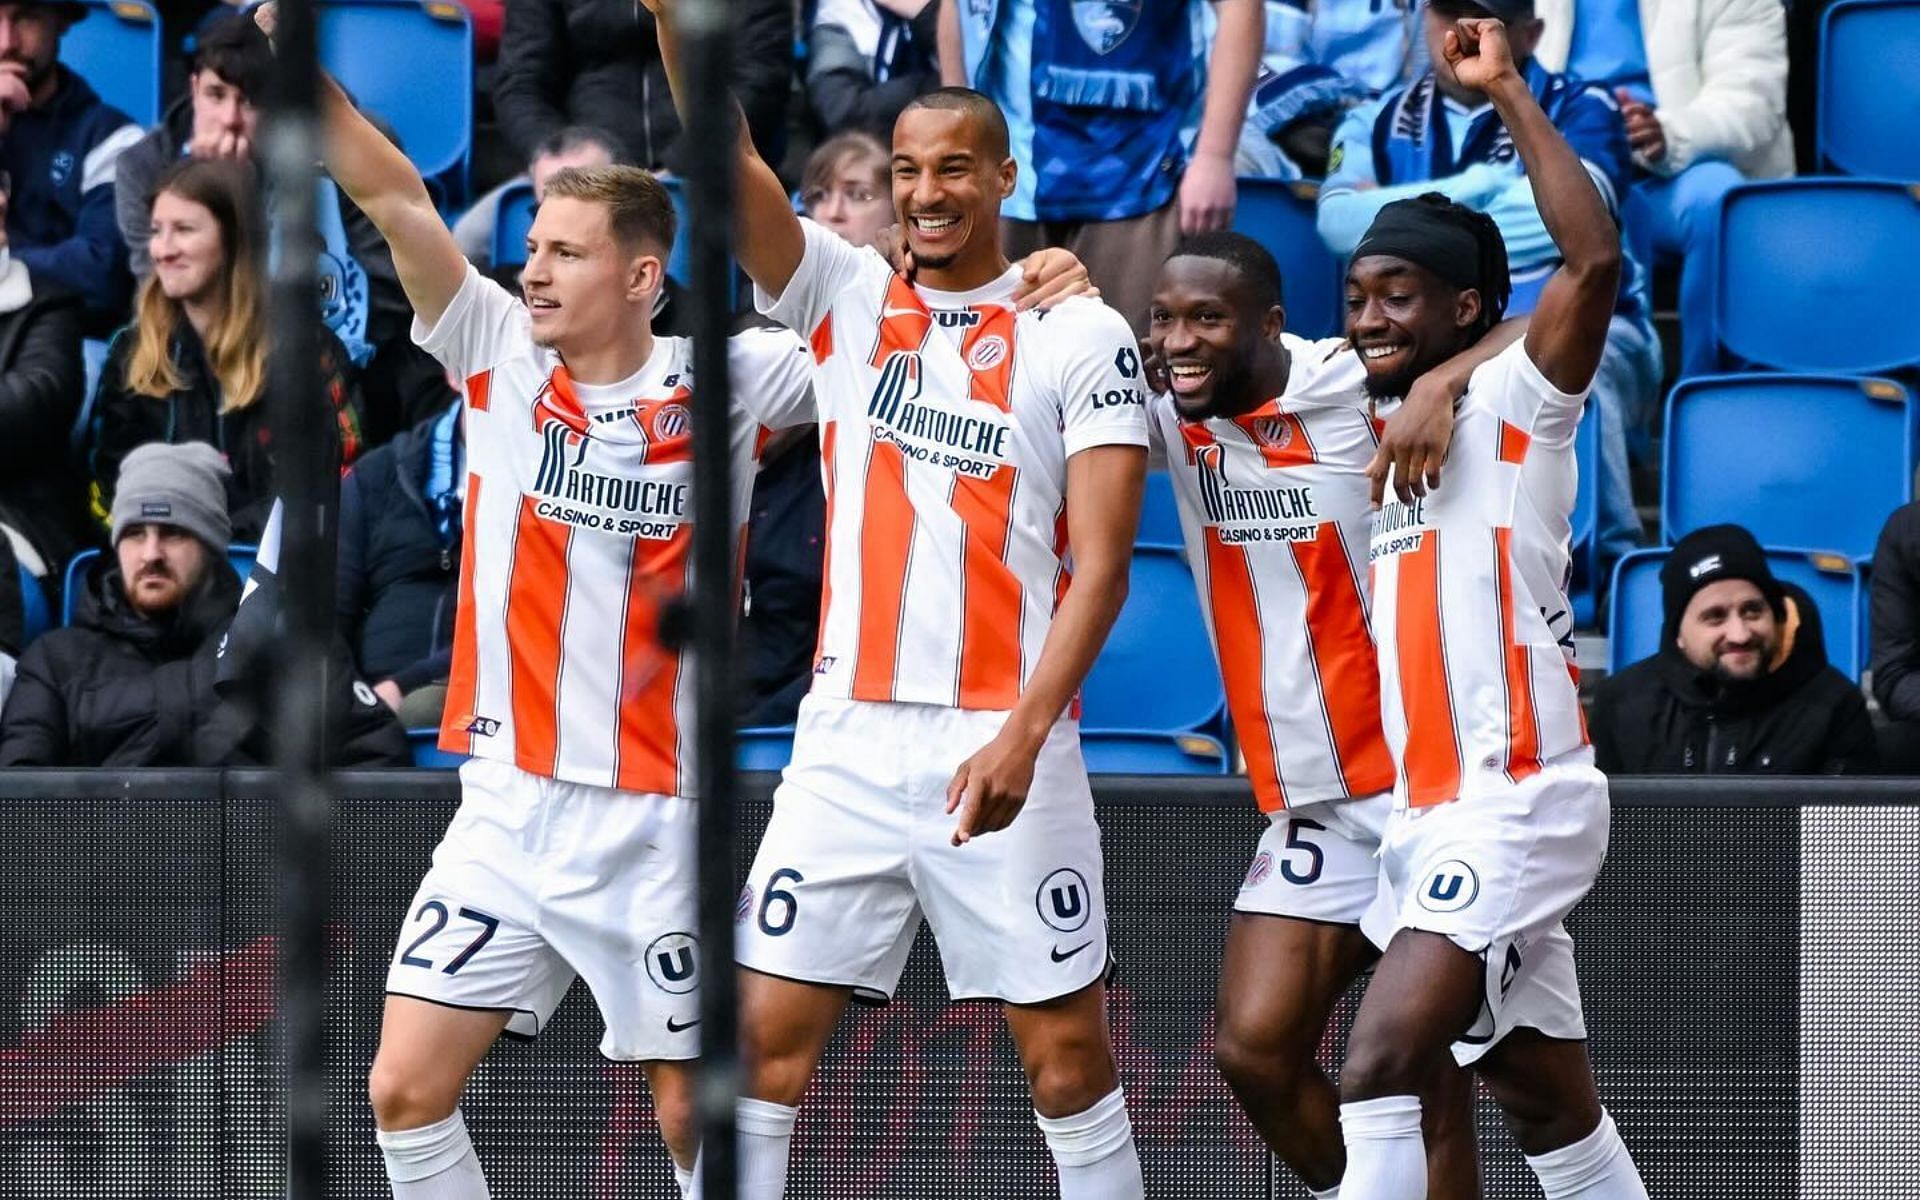 Can Montpellier defeat struggling Lorient this weekend?